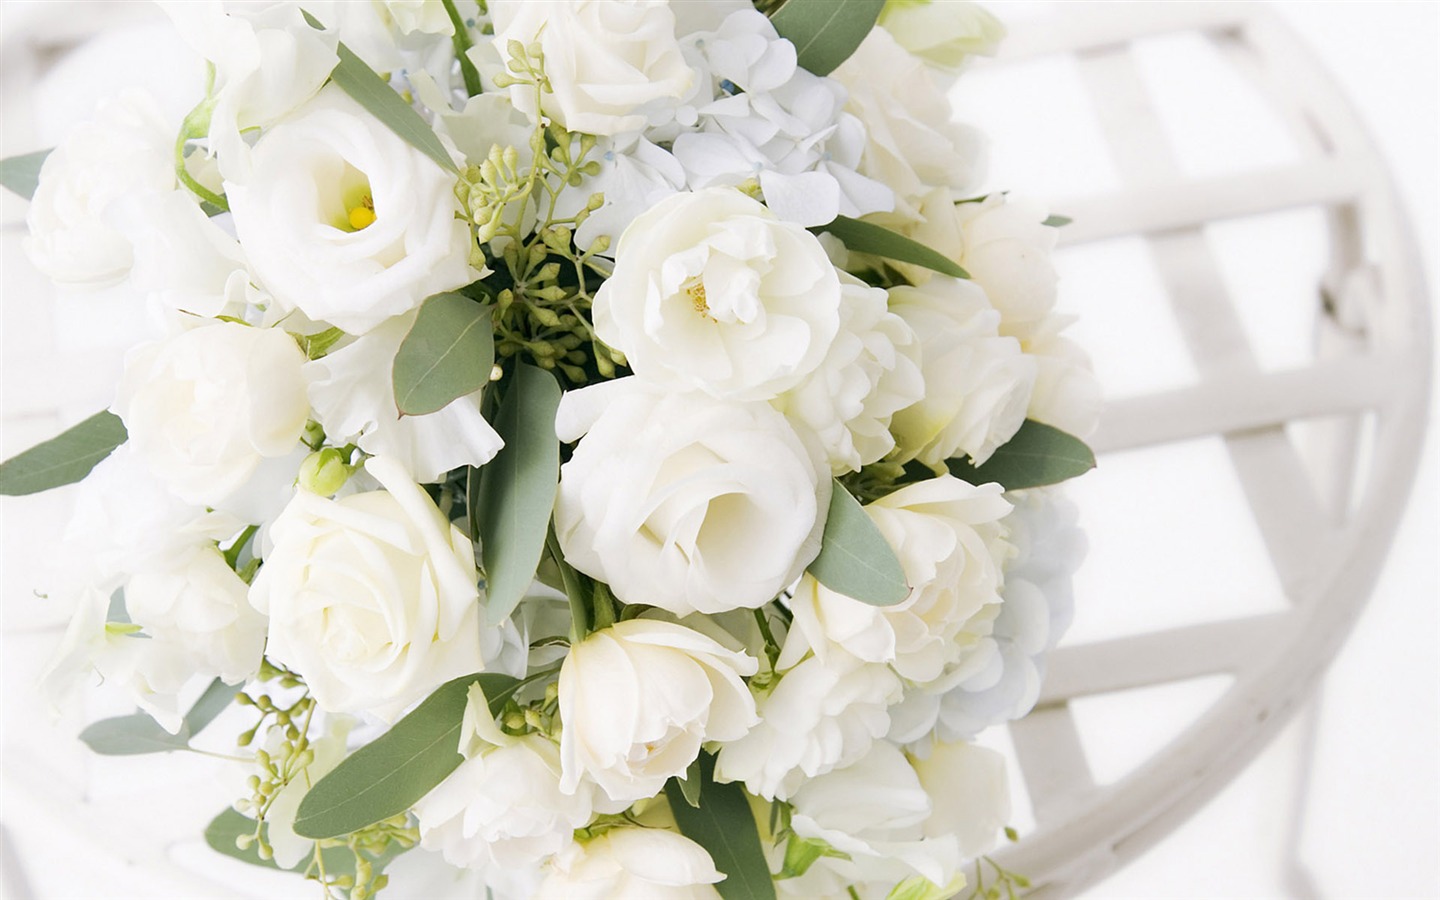 Weddings and Flowers wallpaper (1) #19 - 1440x900